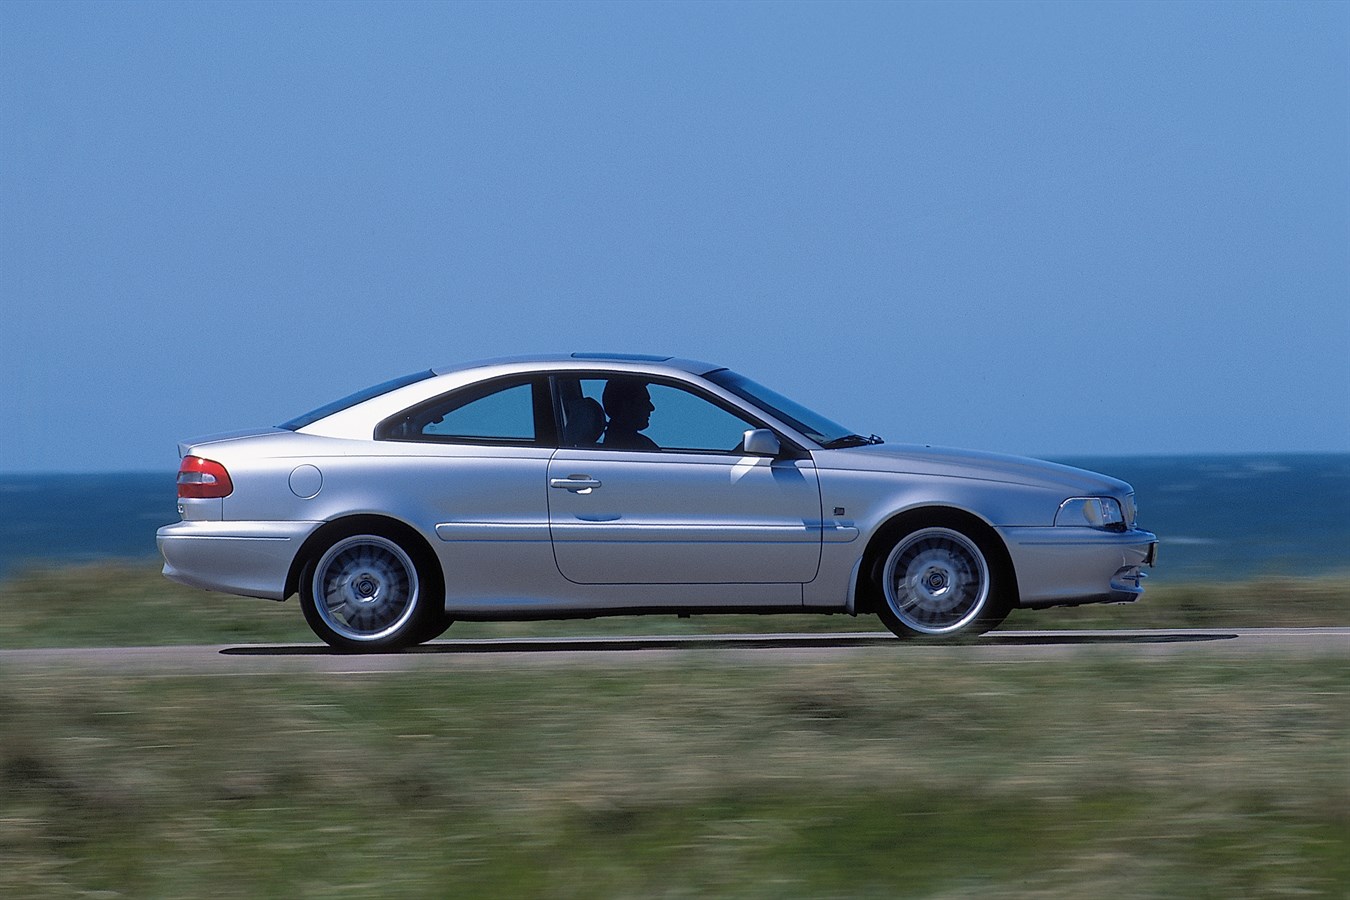 Volvo C70 turns 20 – a niche car made by passion - Volvo Car USA Newsroom